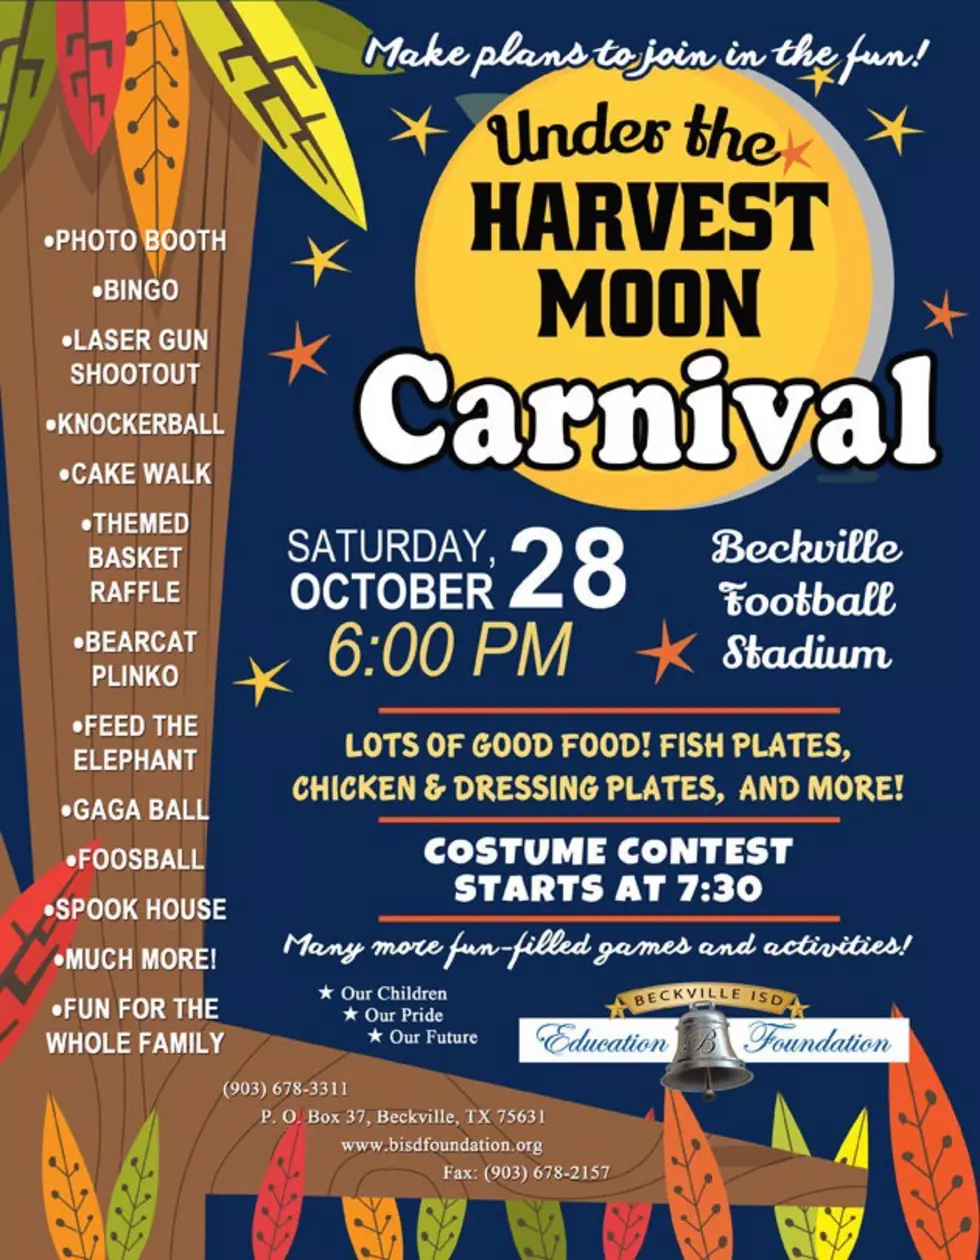 Under the Harvest Moon Carnival